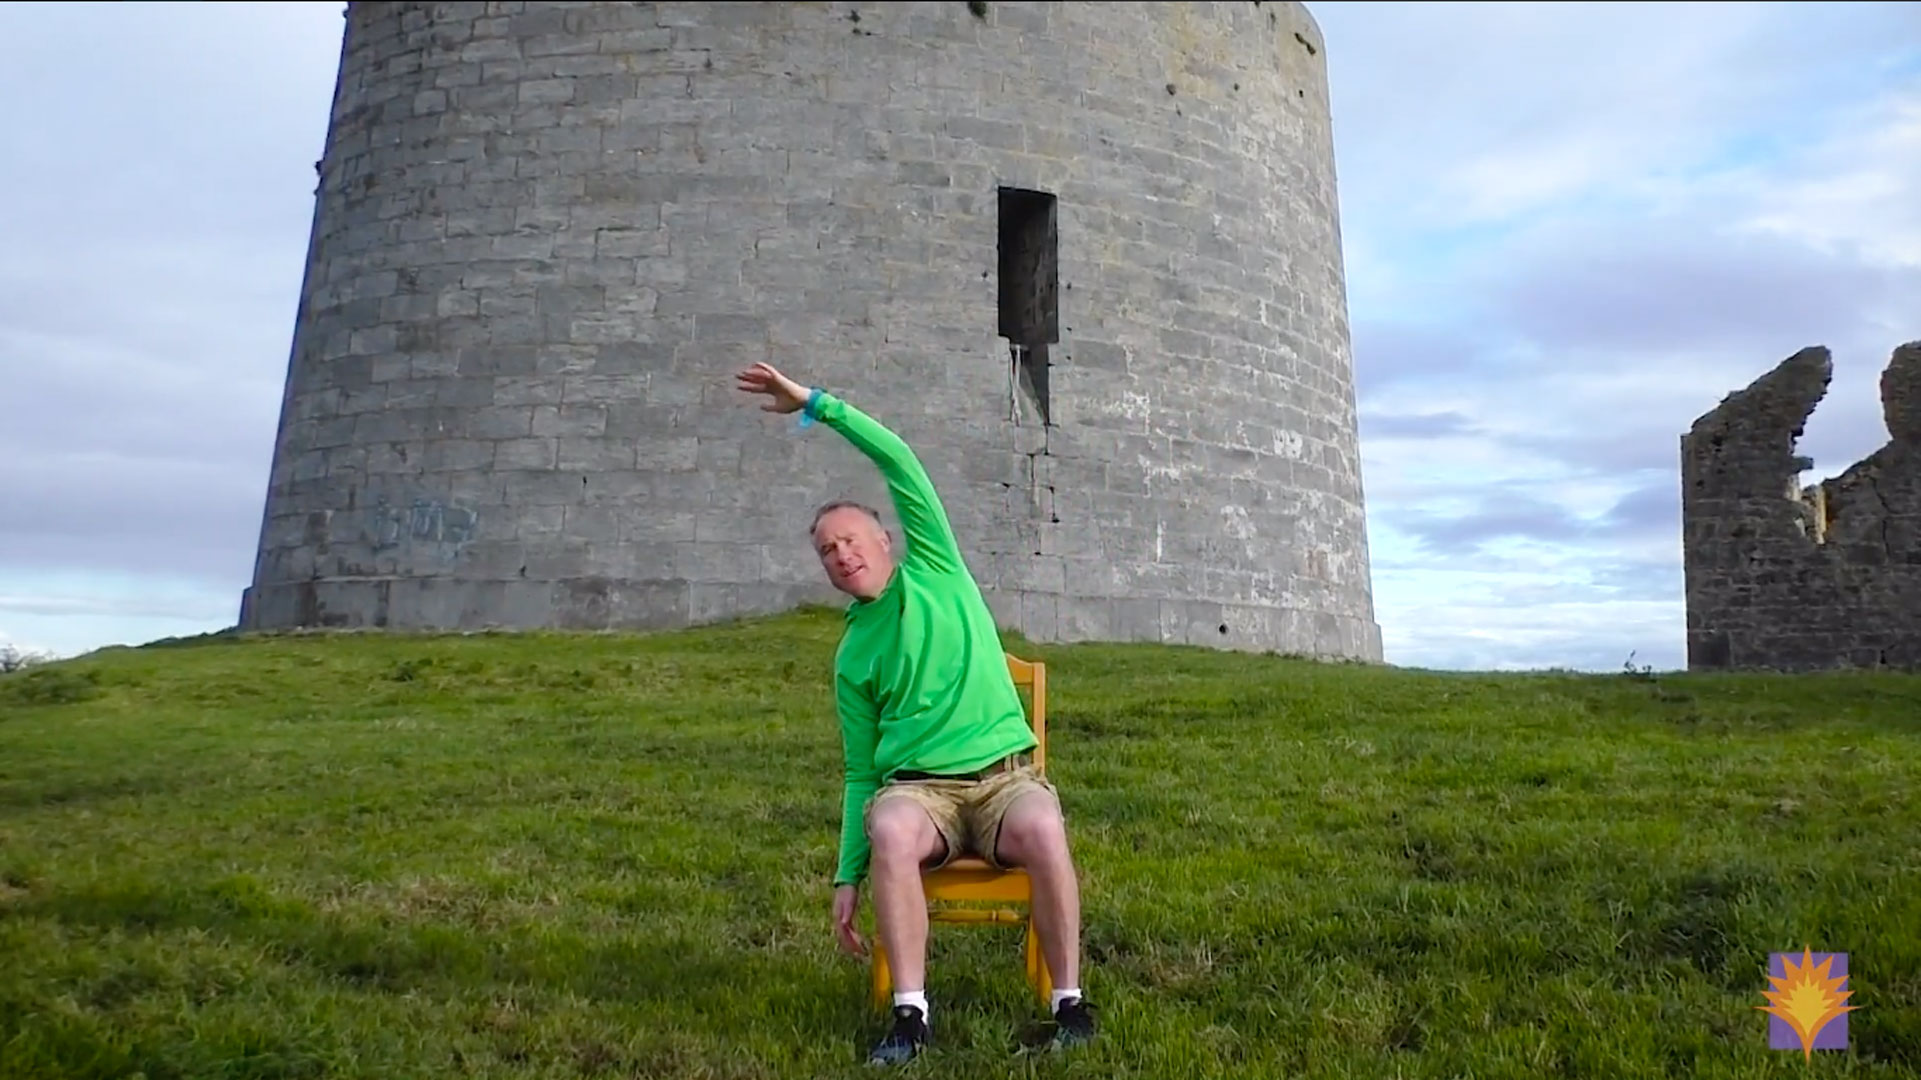 John Conroy: Fun Fitness by the Martello Tower